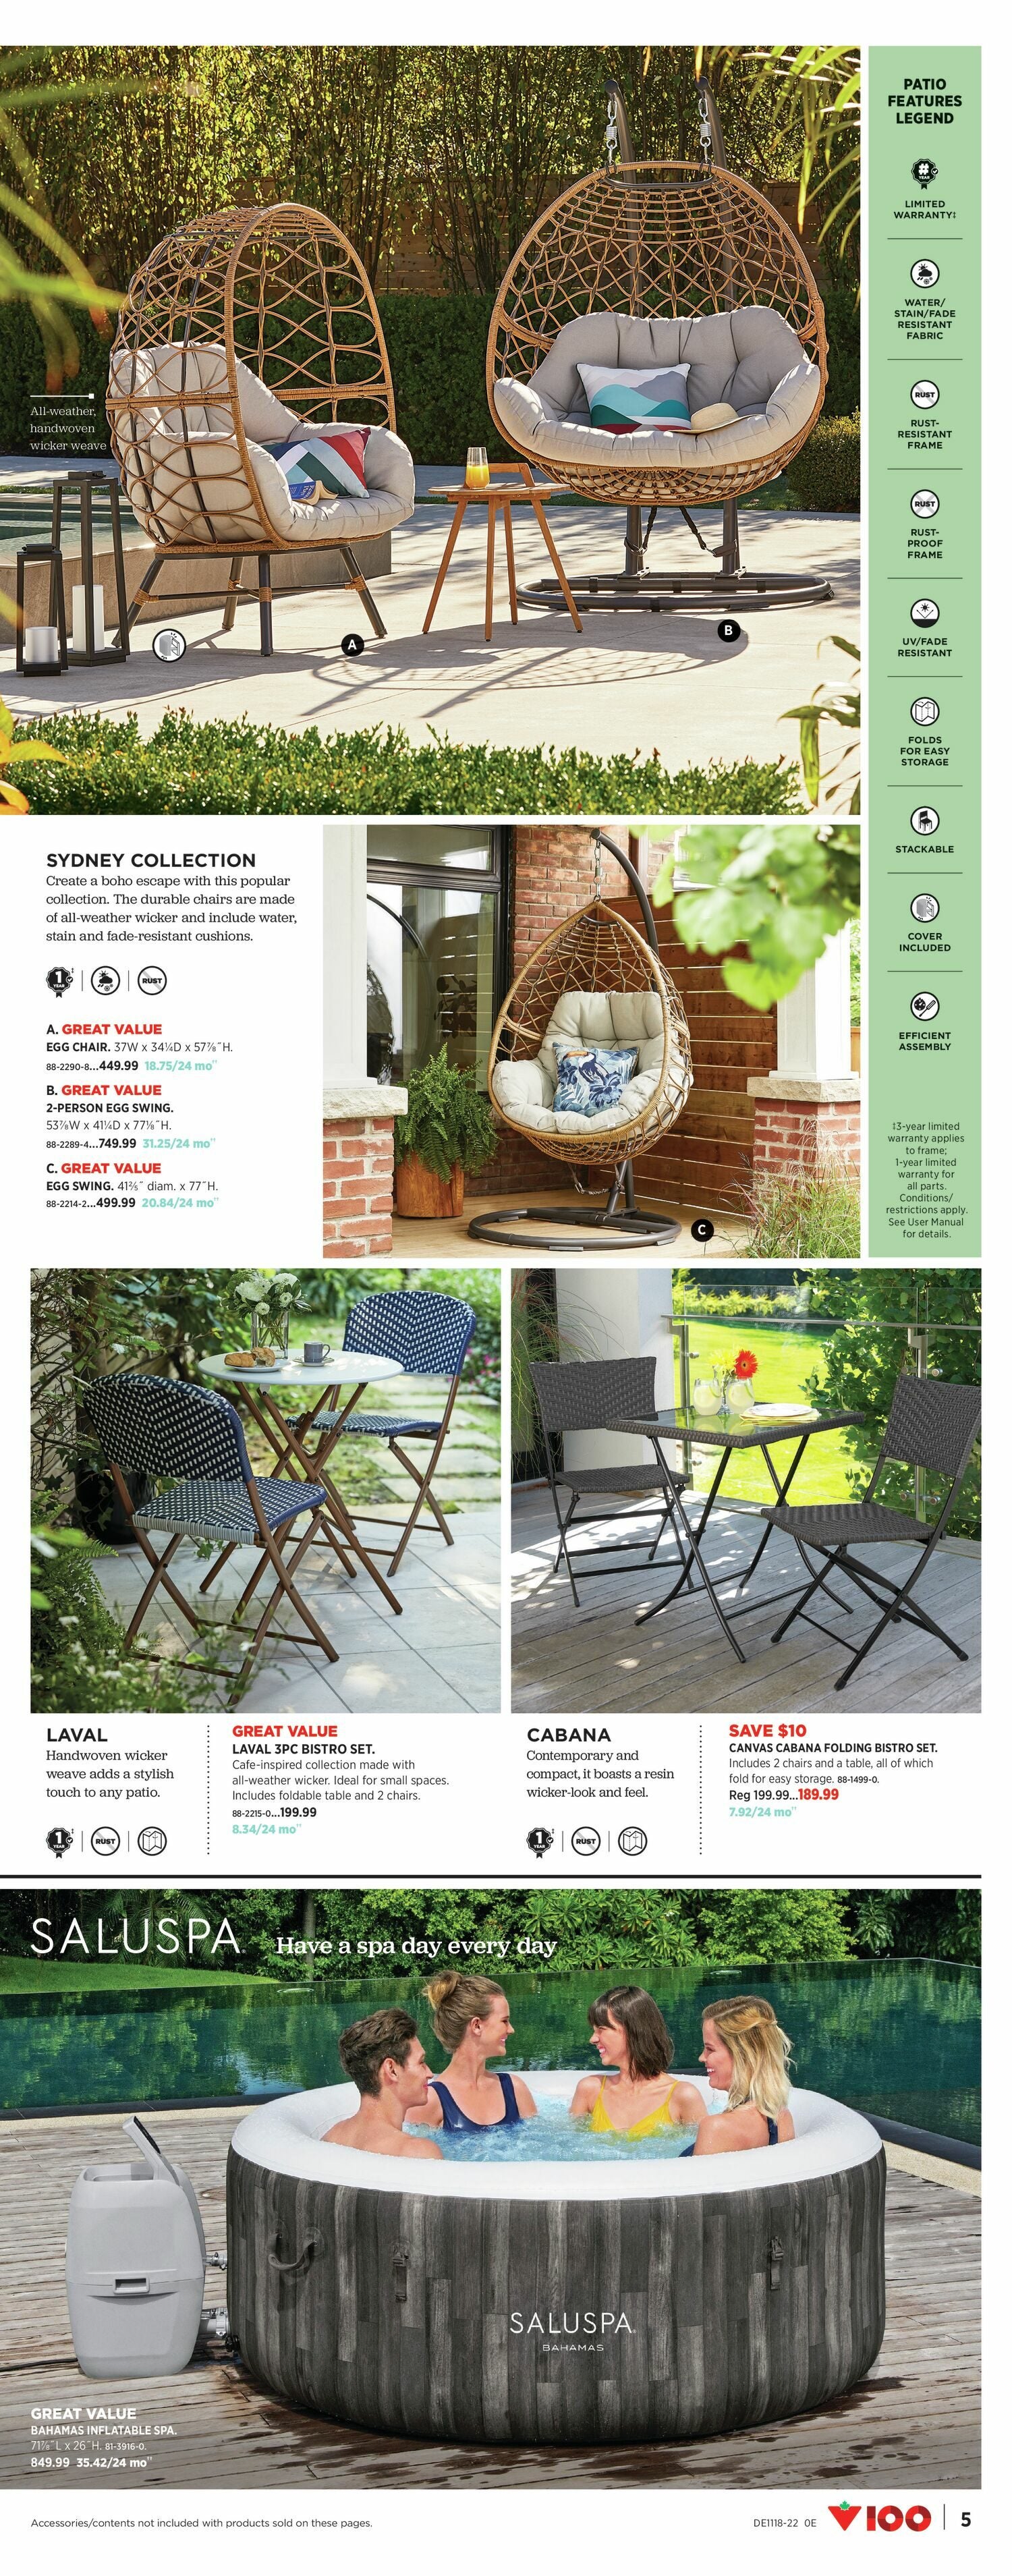 Canadian Tire Weekly Flyer - Spring Inspirations - Apr 29 – May 19